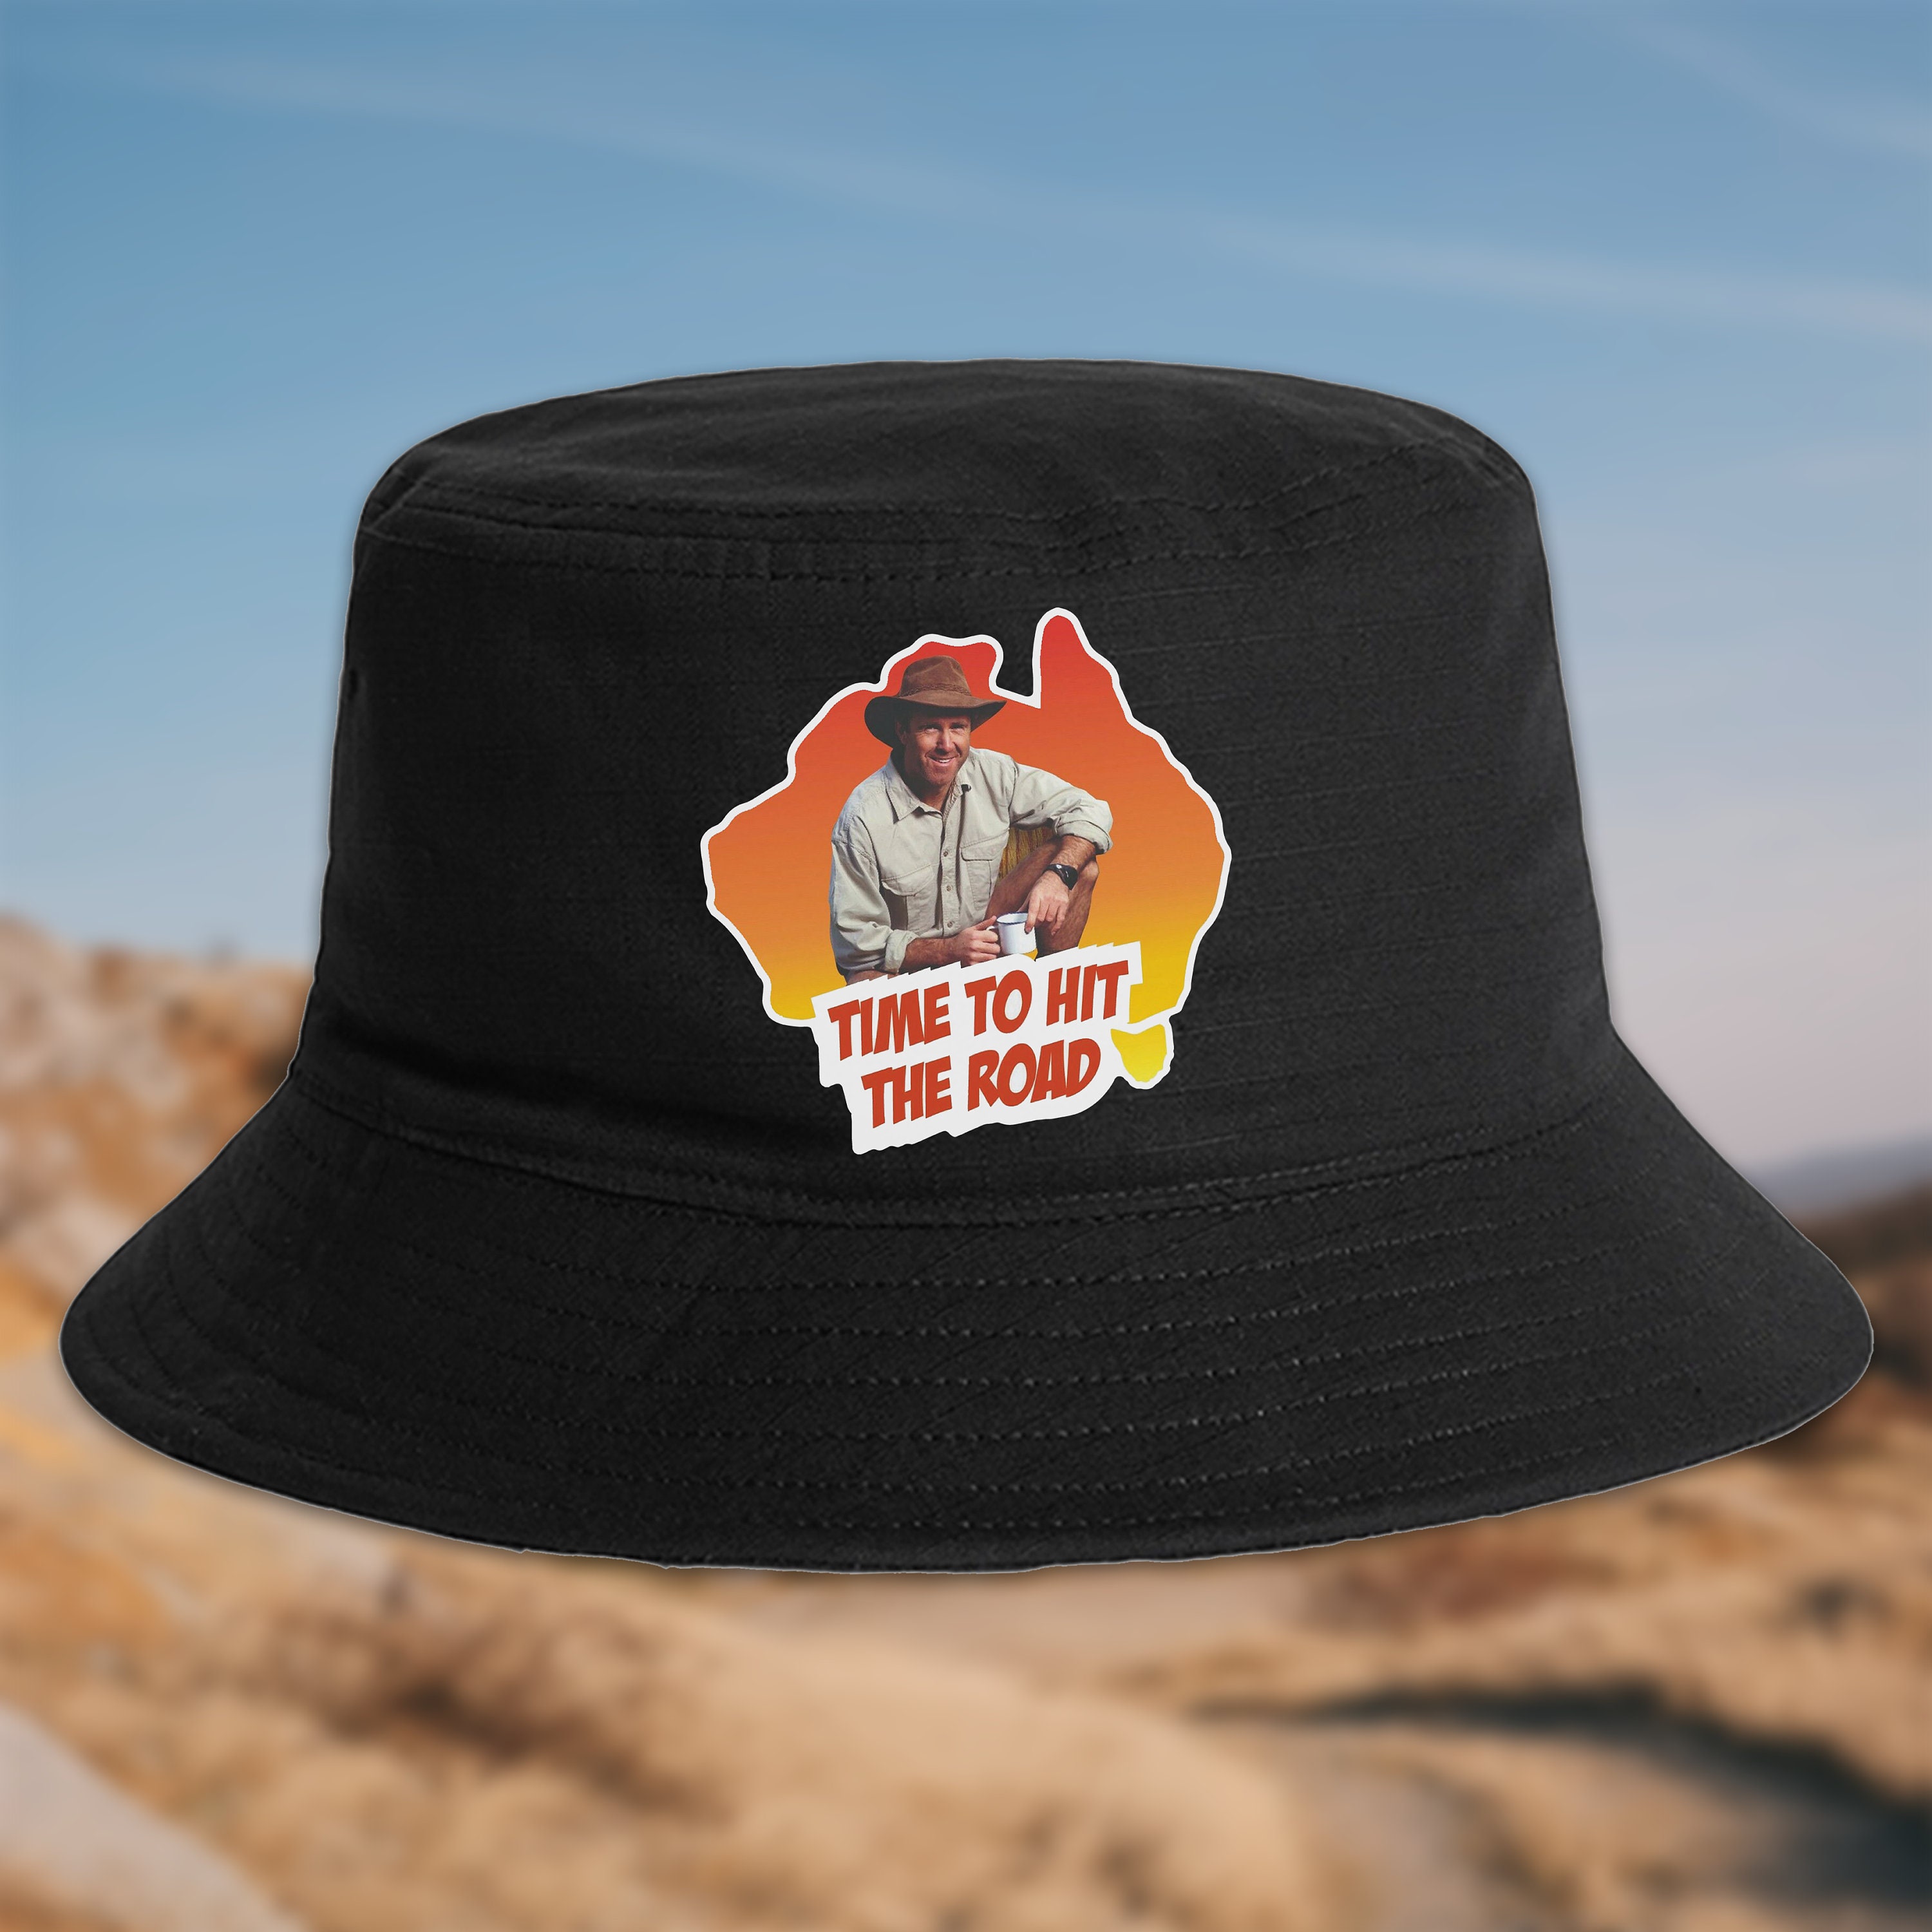 Time to Hit the Road 5 Bucket Hat Summer Fun Cool Aussie Meme Funny Bogan  Smoko 4x4 Adventure Russell Coight -  Canada